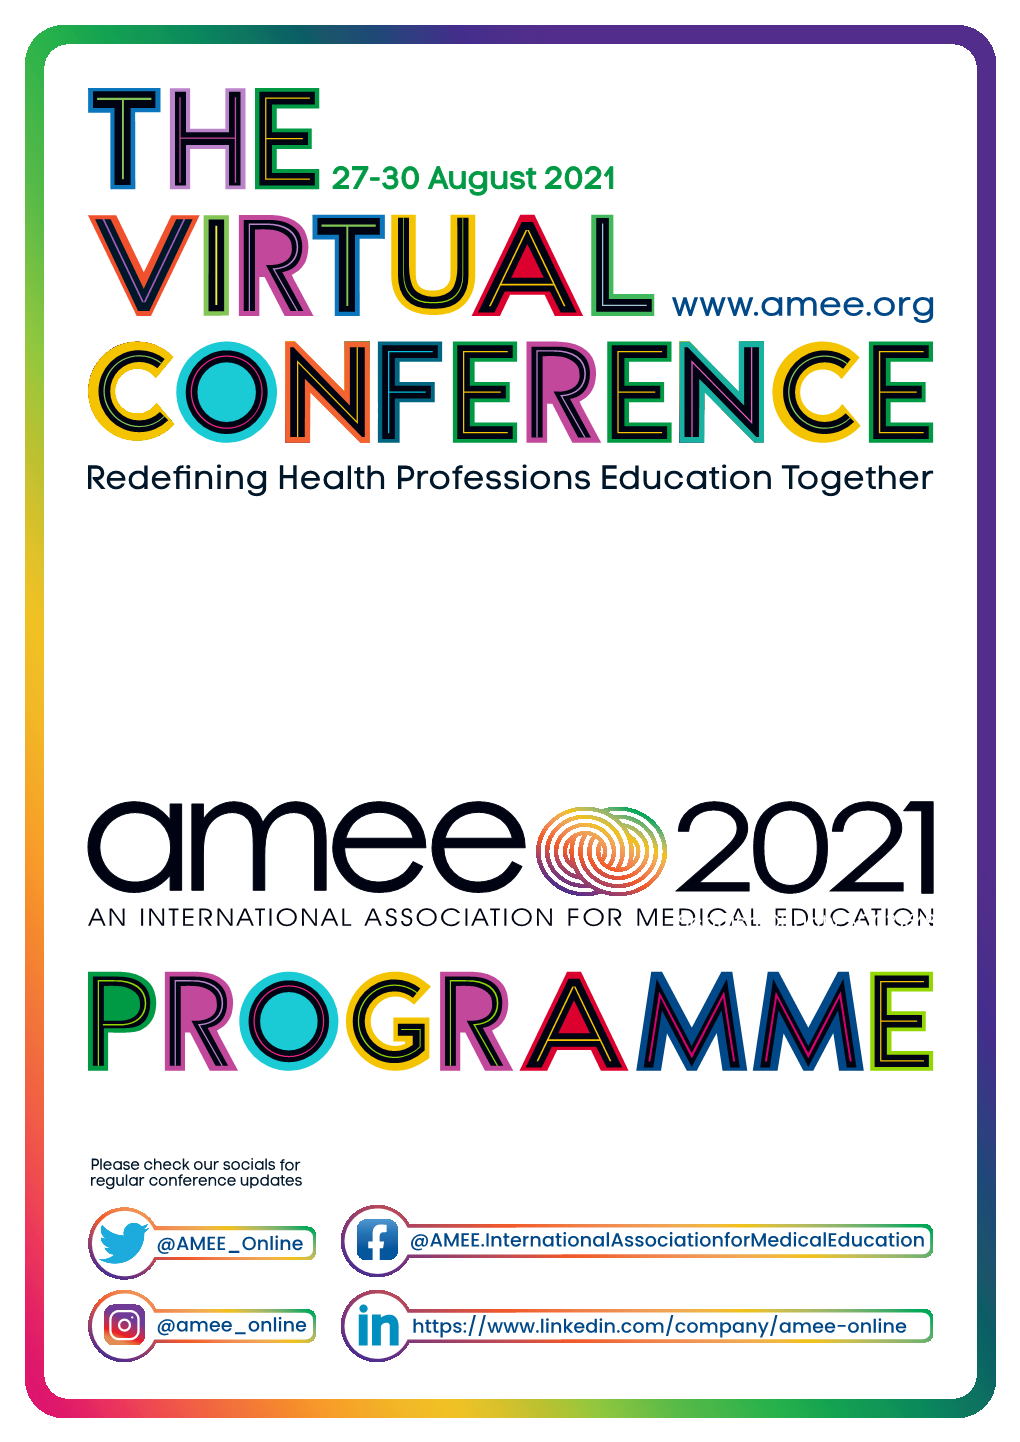 27-30 August 2021 Conference Programme